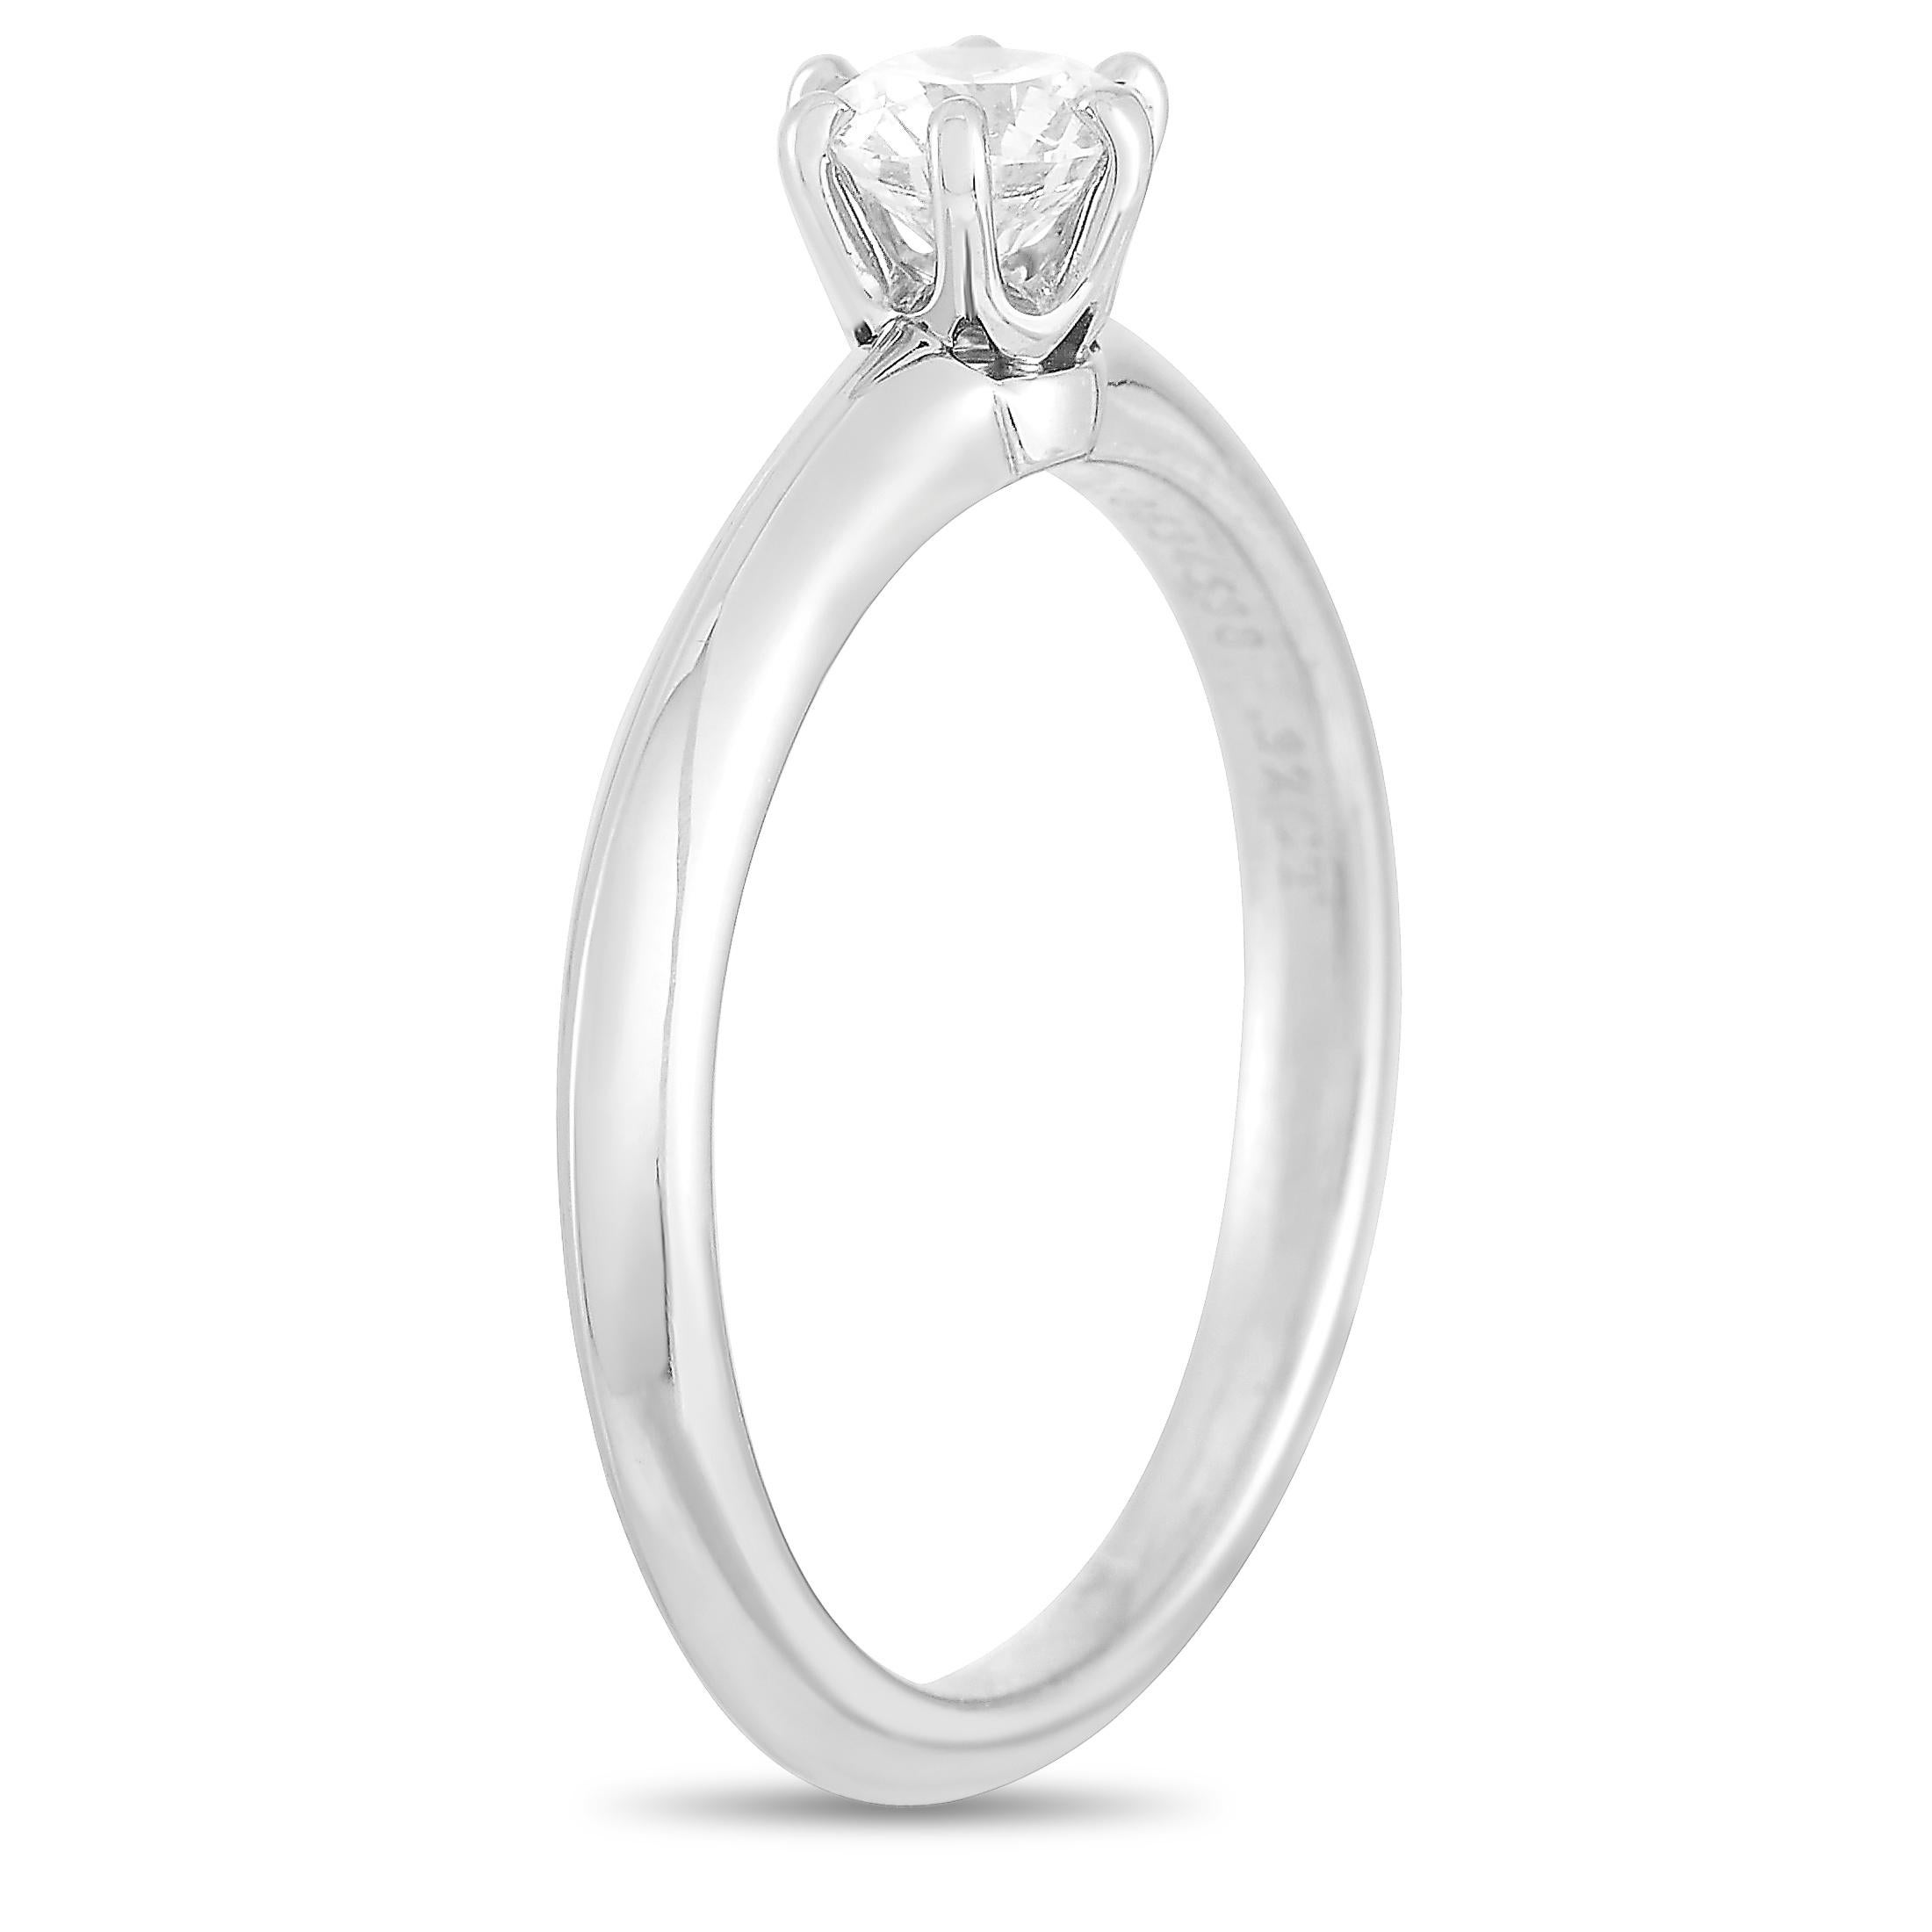 This Tiffany & Co. engagement ring is made of platinum and set with a 0.32 ct diamond stone that features est. G color and VS1 clarity. The ring weighs 3.2 grams and boasts band thickness of 2 mm and top height of 5 mm, while top dimensions measure